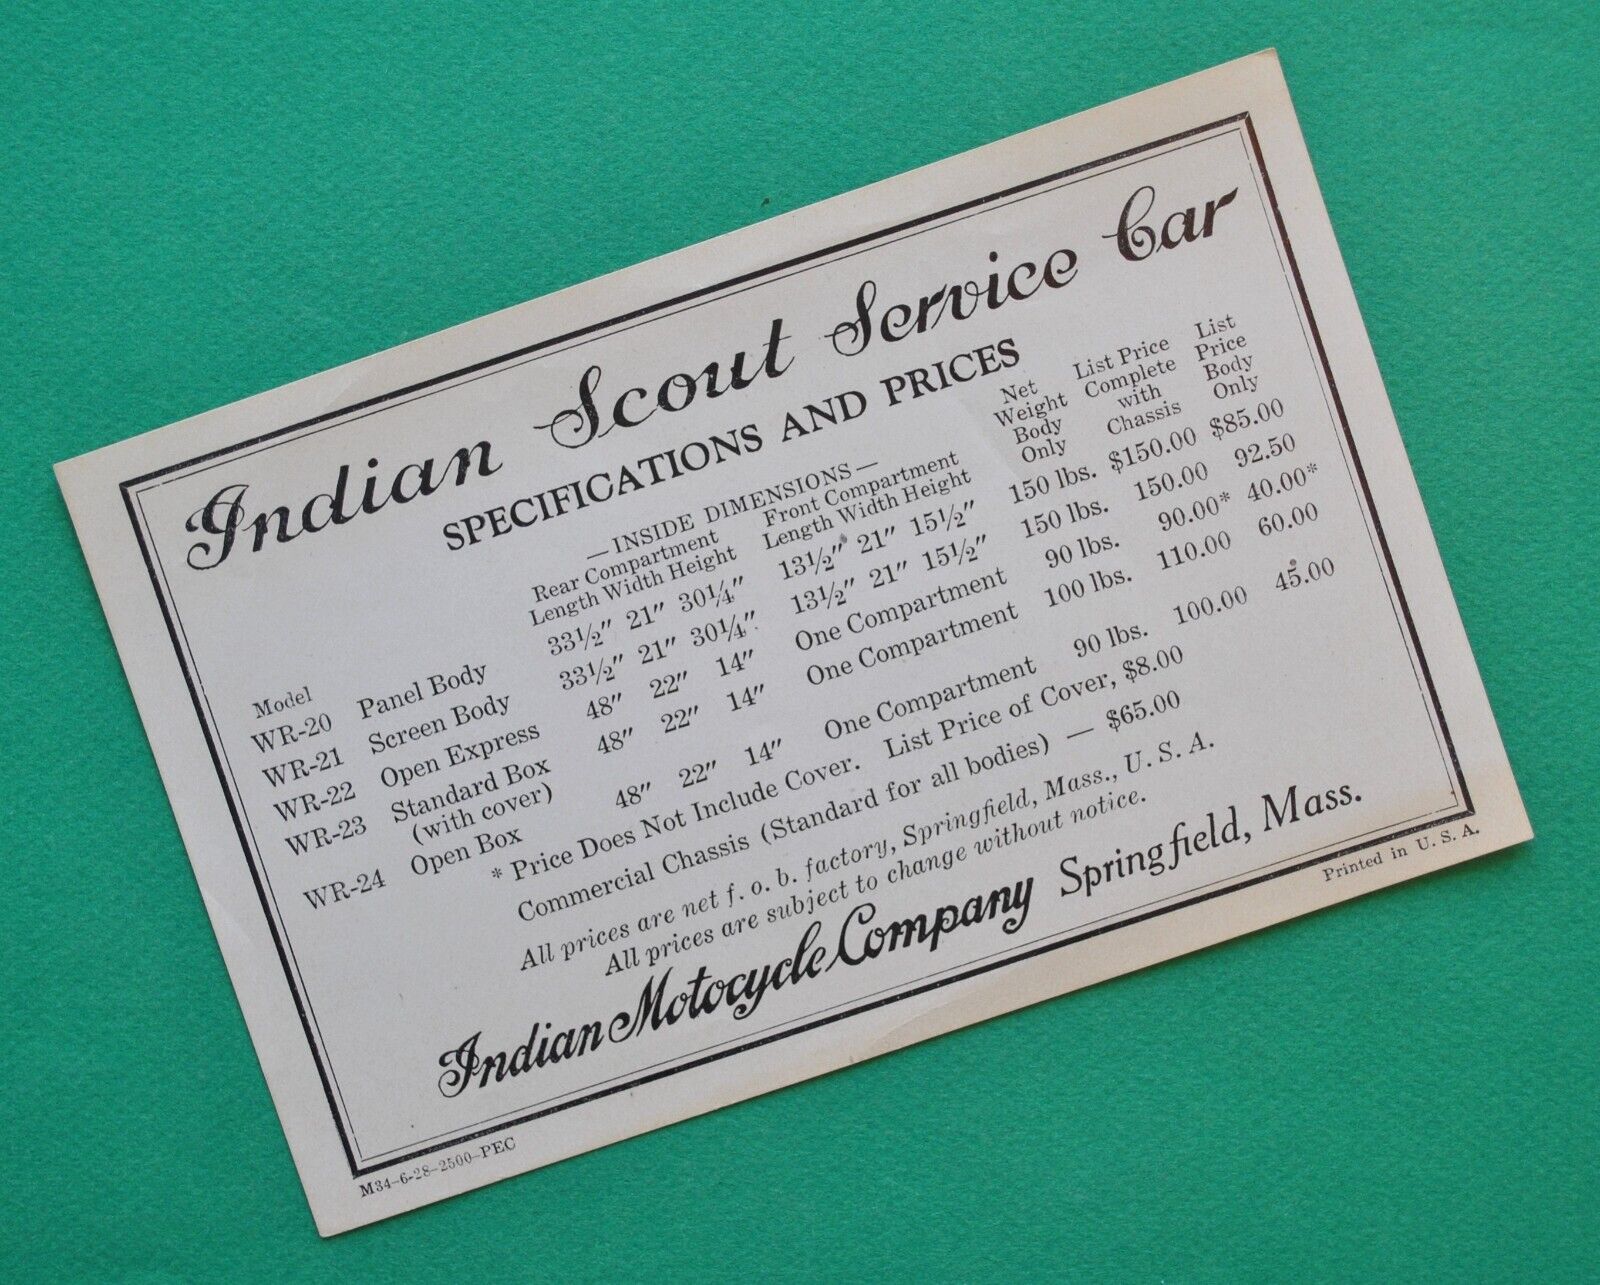 Antique Original 1928 Indian Motorcycle Brochure Scout Service Car Specification